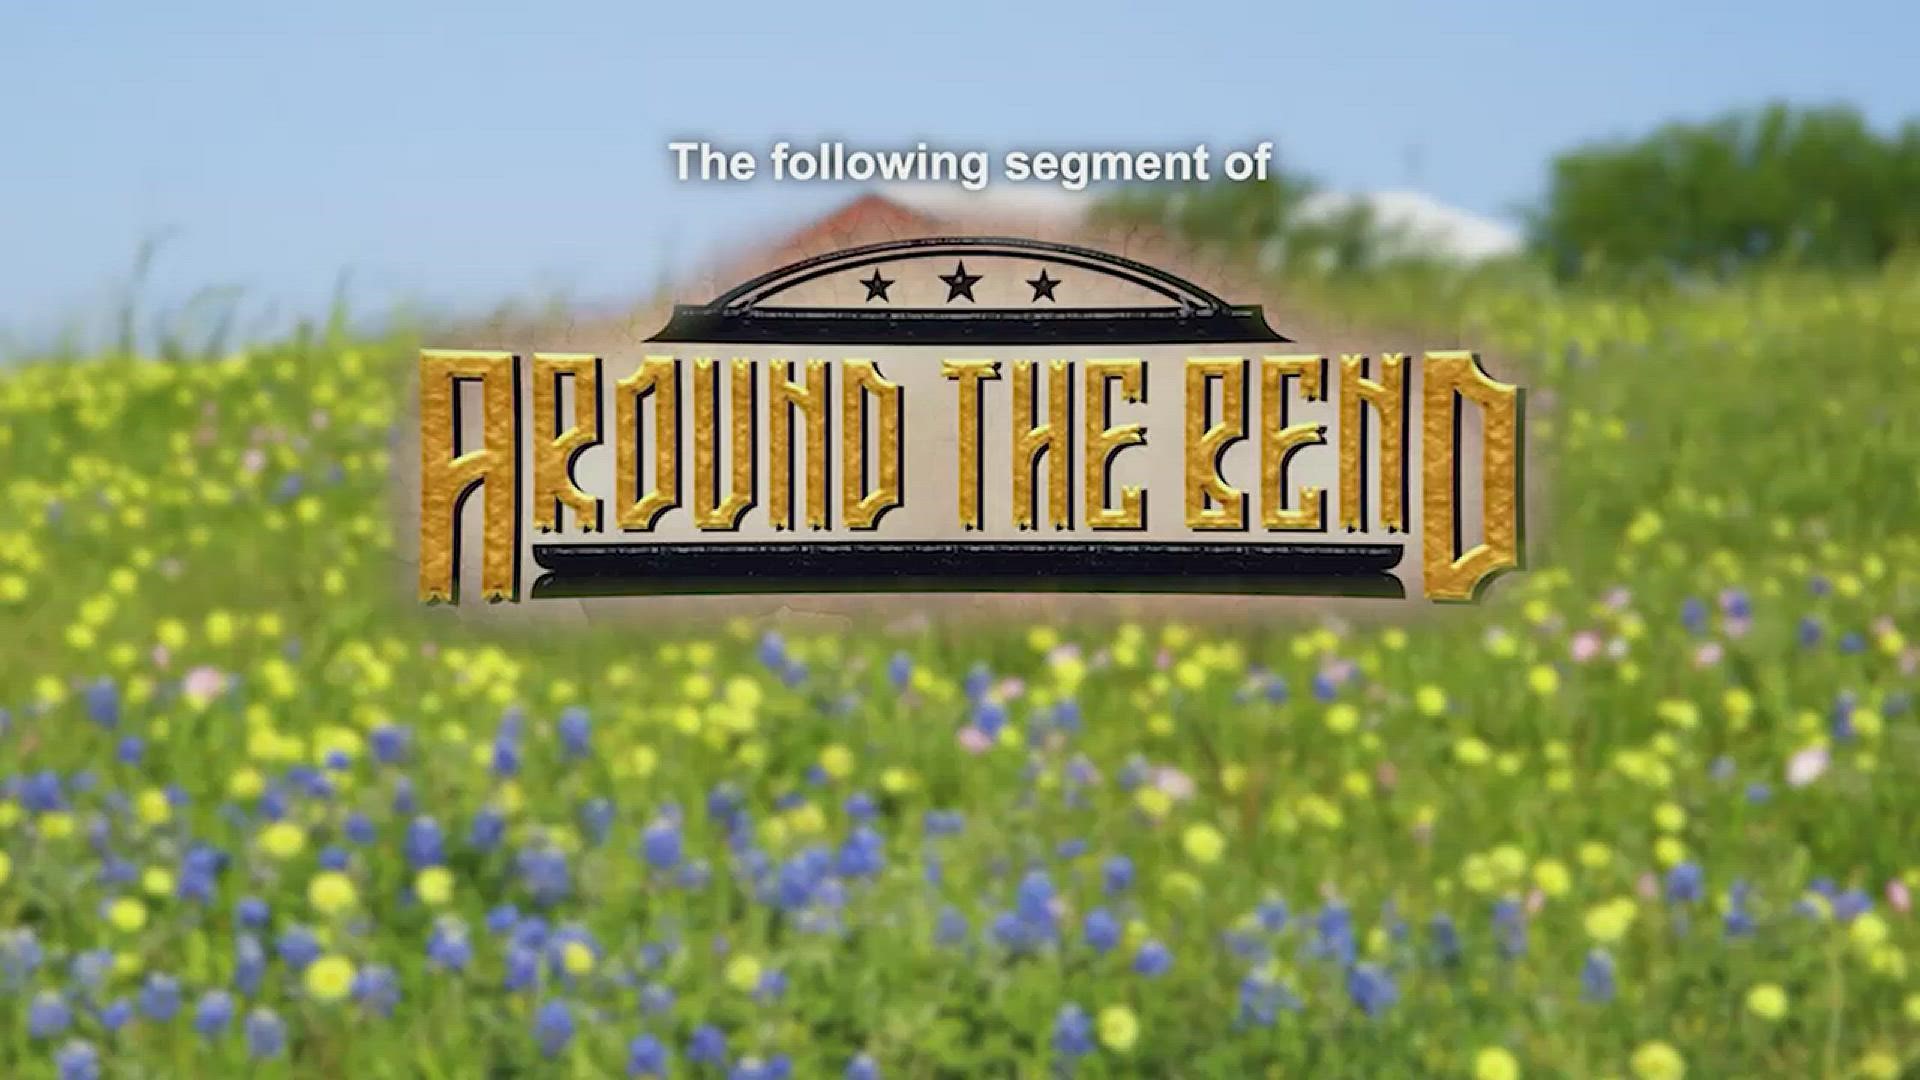 Around the Bend is a weekly sponsored segment featuring businesses in the Coastal Bend.